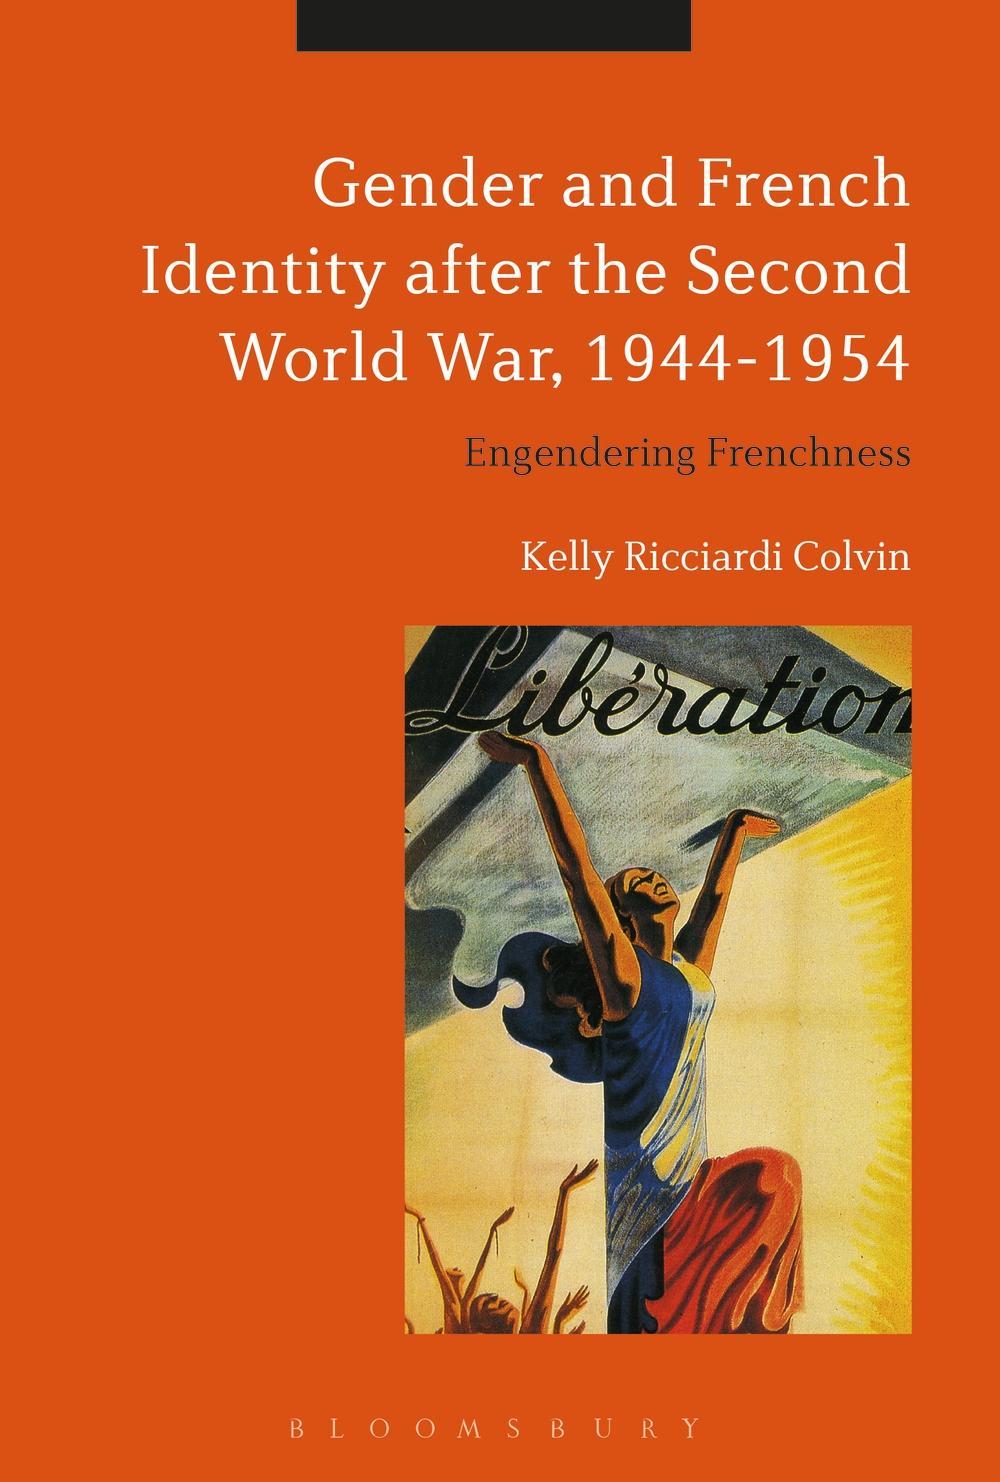 Gender and French Identity after the Second World War, 1944-